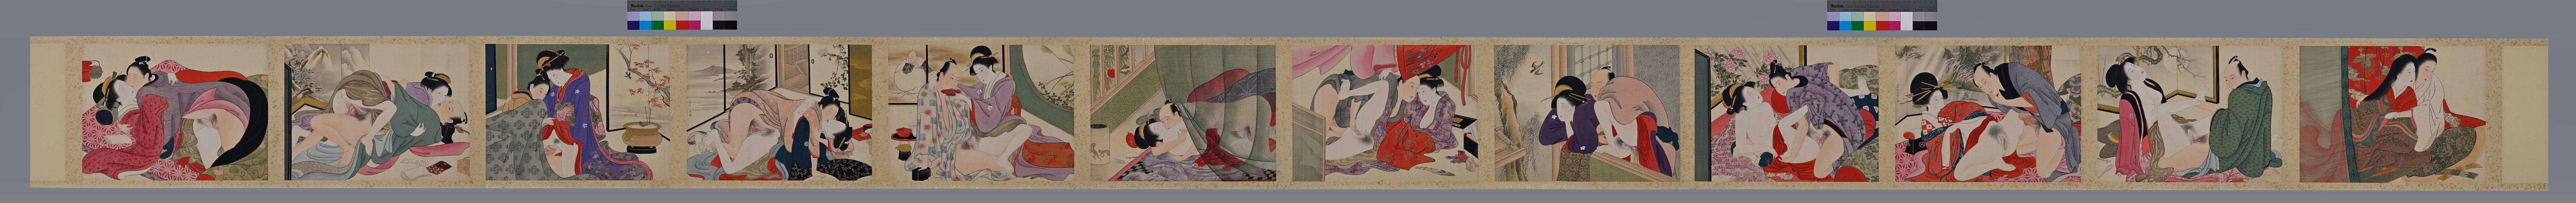 Shunga 

Unknown artist

Meiji era, circa 1880

Hand-scroll mounted with 12 paintings

Ink, pigment and gofun on silk

Dimensions:

Each image measures H. 23.2 cm x W. 34.4 cm (9.15” x 13.5”)
The hand-scroll measures H. 28 cm x W. 540